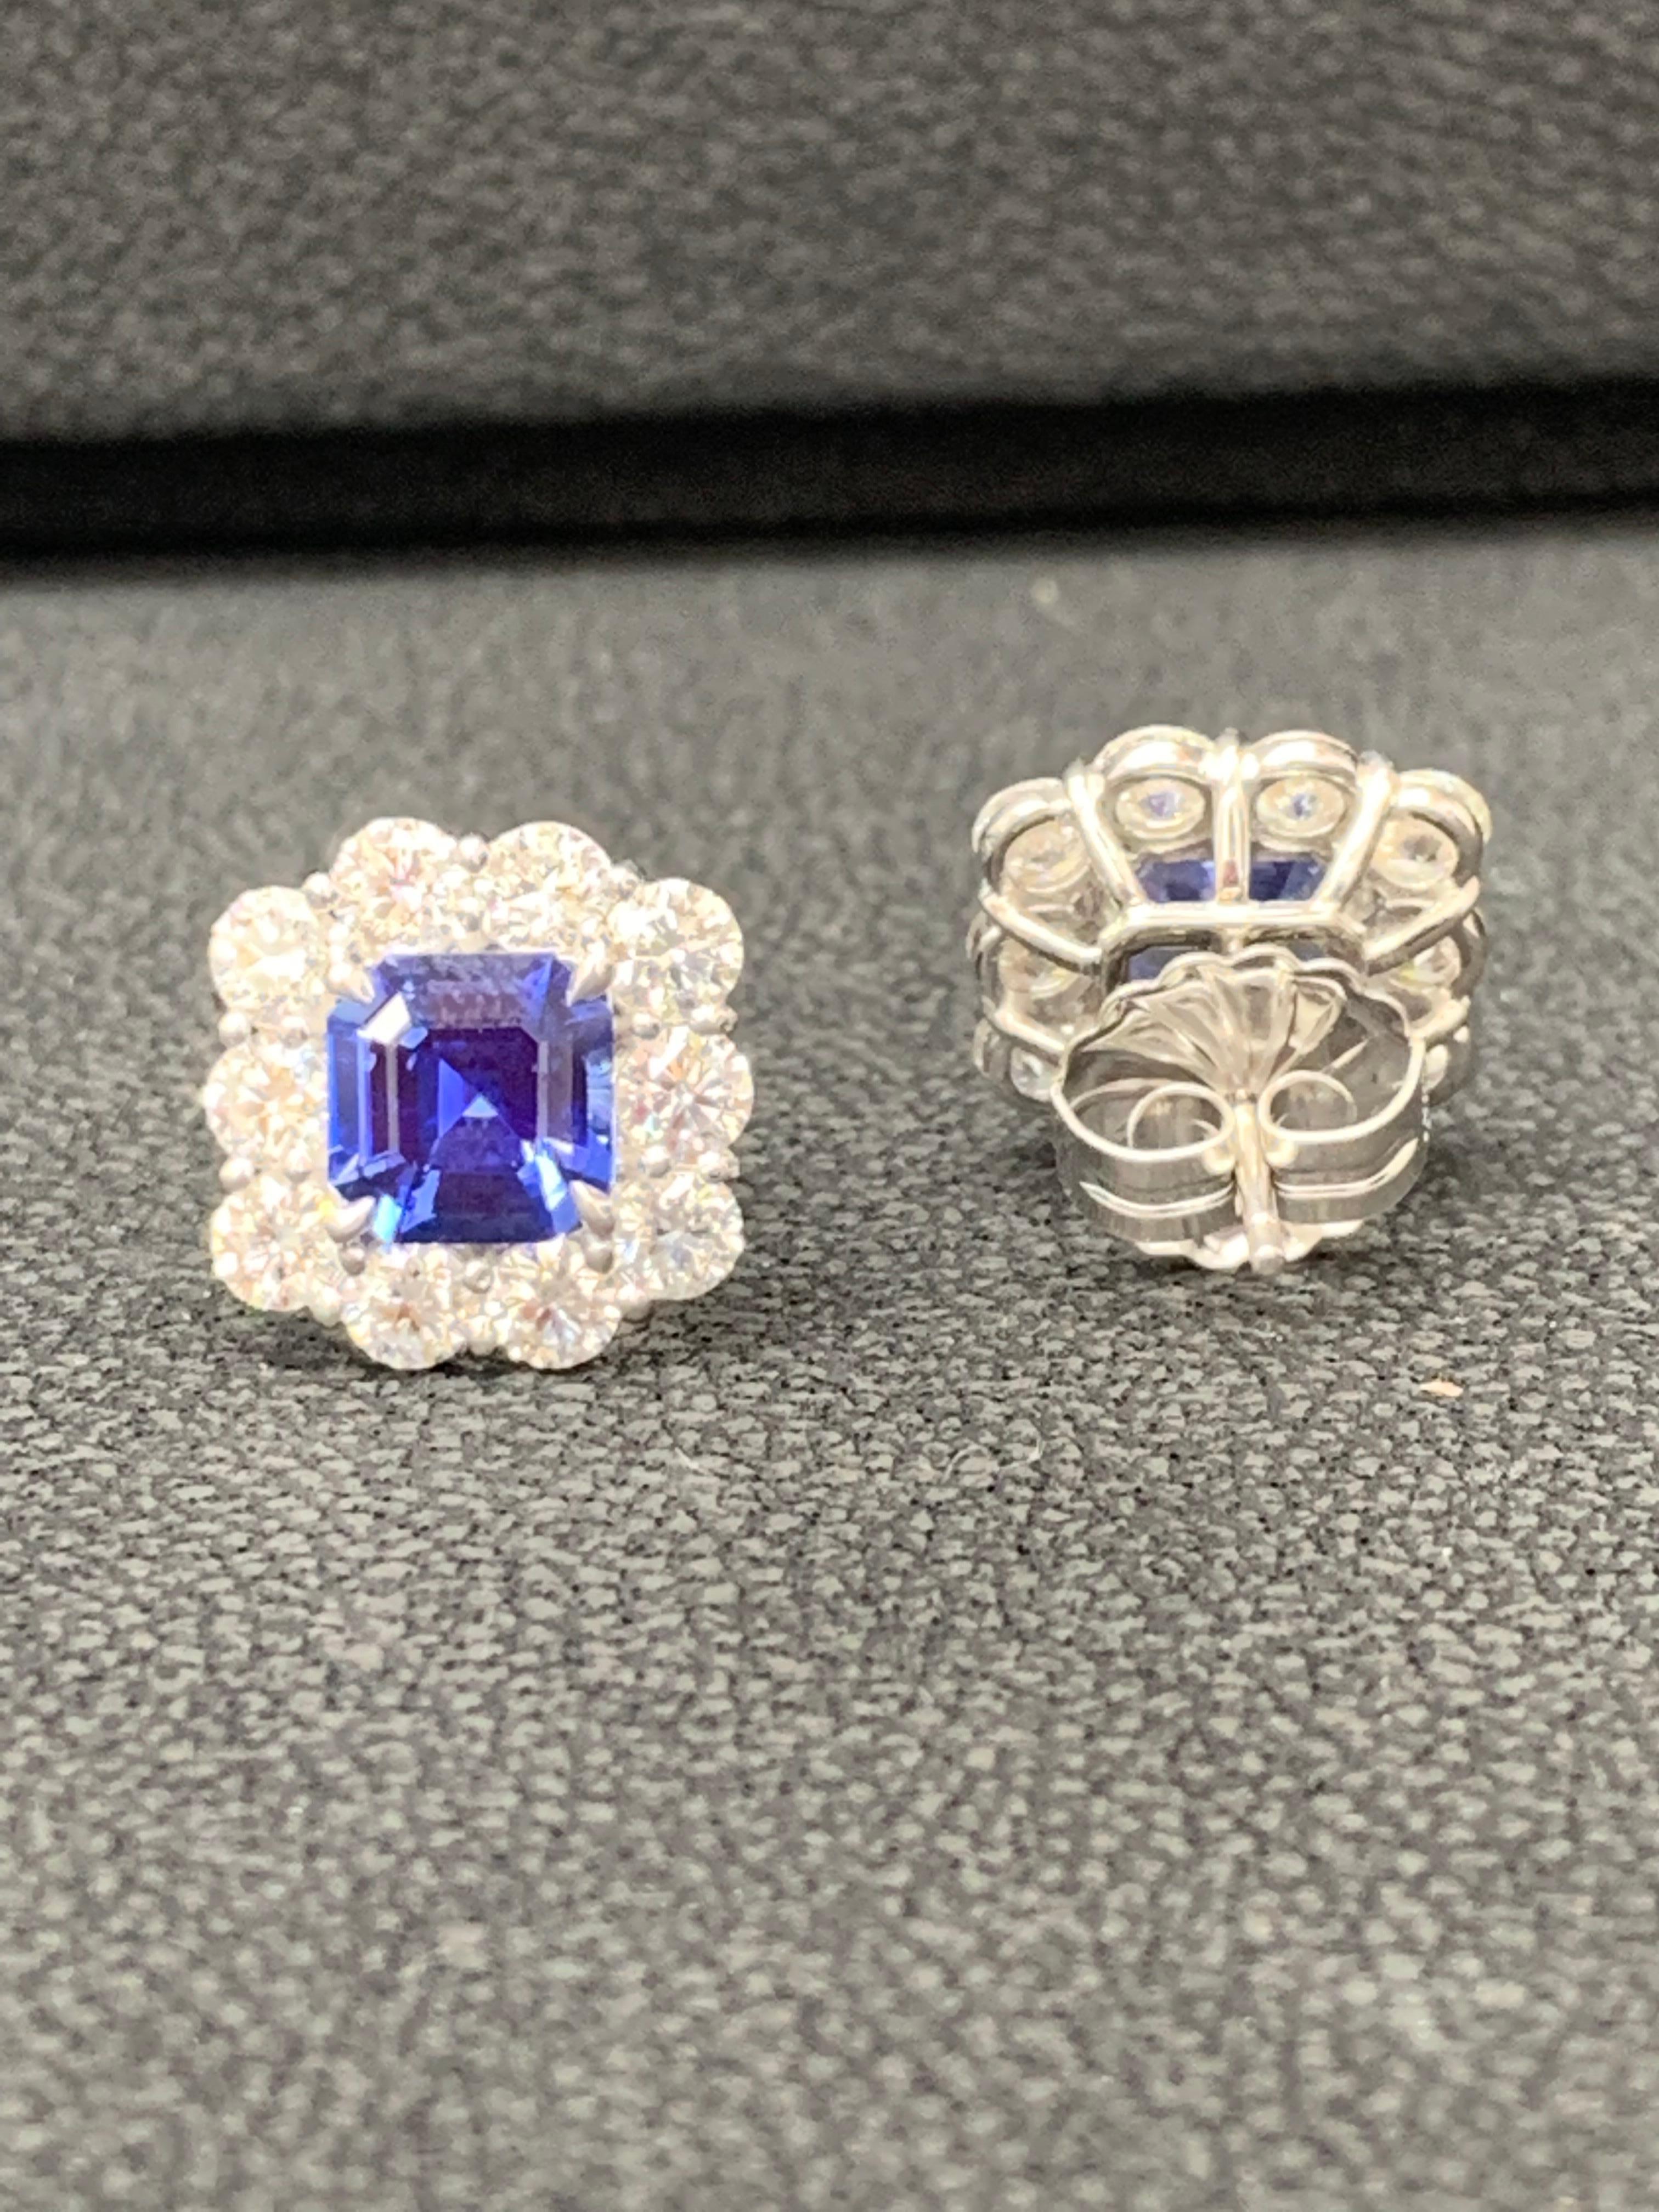 Modern 3.02 Carat Emerald Cut Blue Sapphire and Diamond Stud Earrings in 18K White Gold For Sale